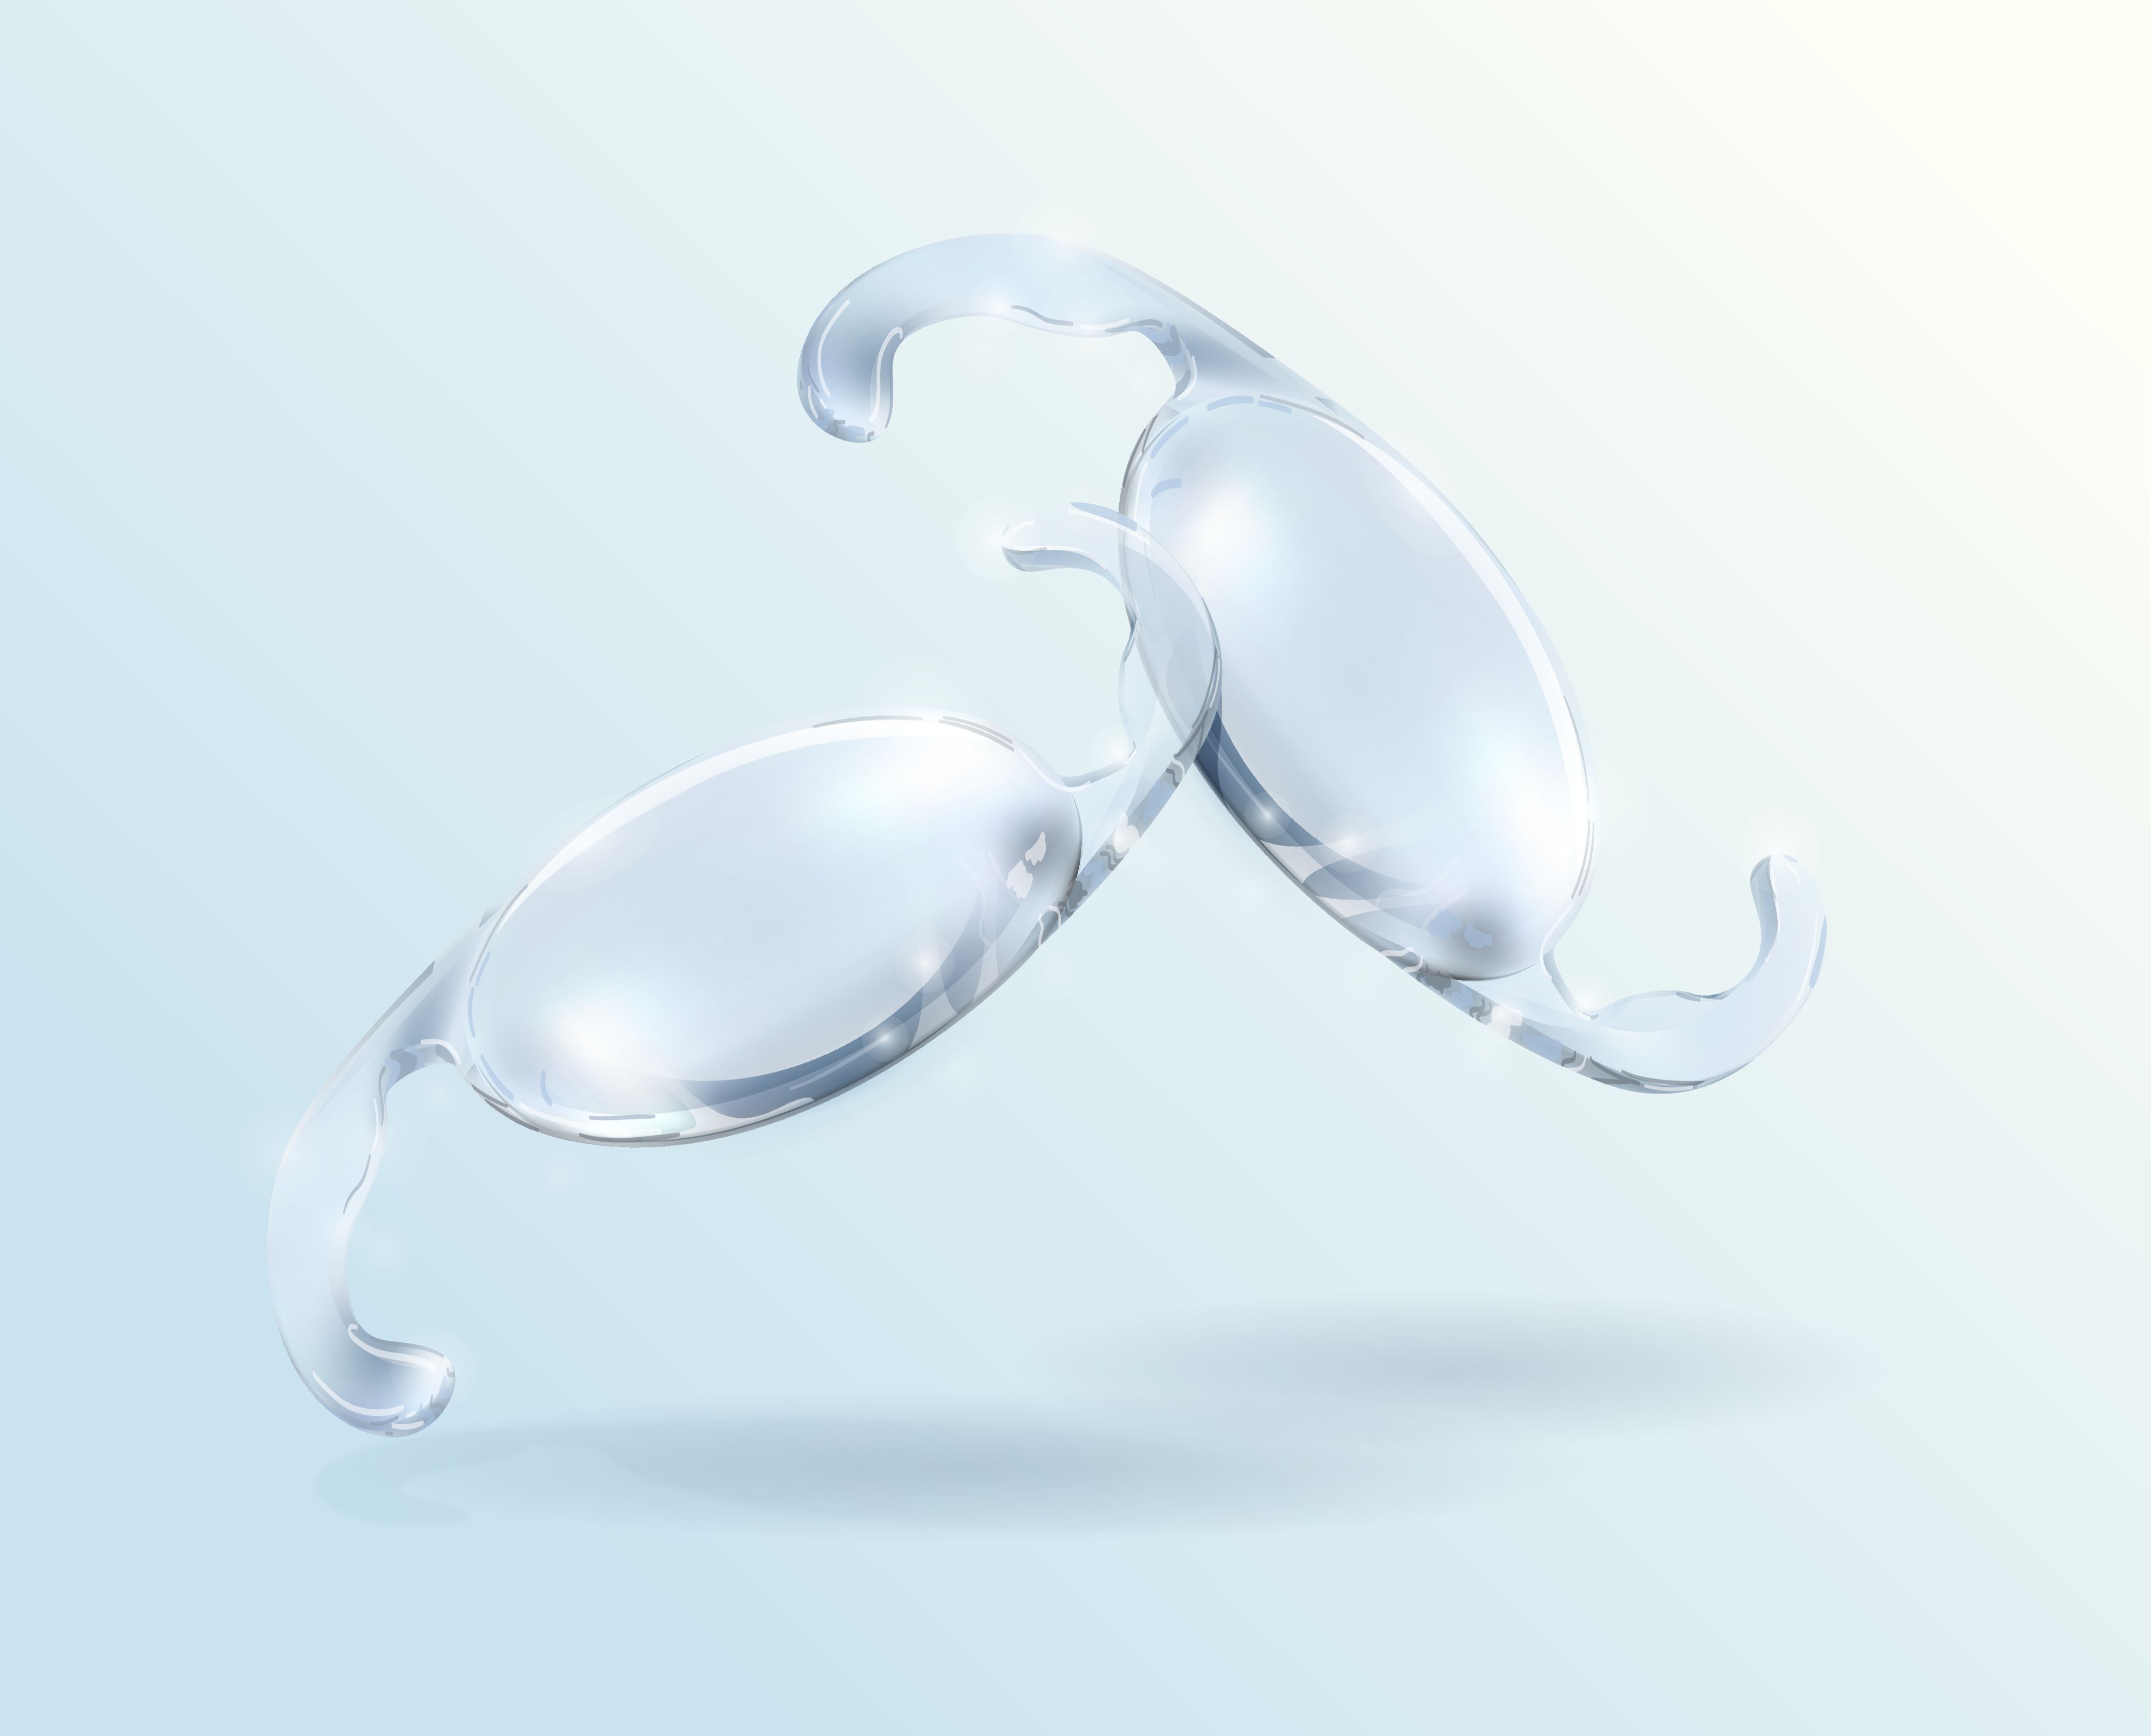 A comparison of 2 hydrophobic acrylic intraocular lenses (IOLs) evaluated the long-term formation of posterior capsular opacification (PCO) and the rate of glistenings that developed. (Image courtesy stock.adobe.com)